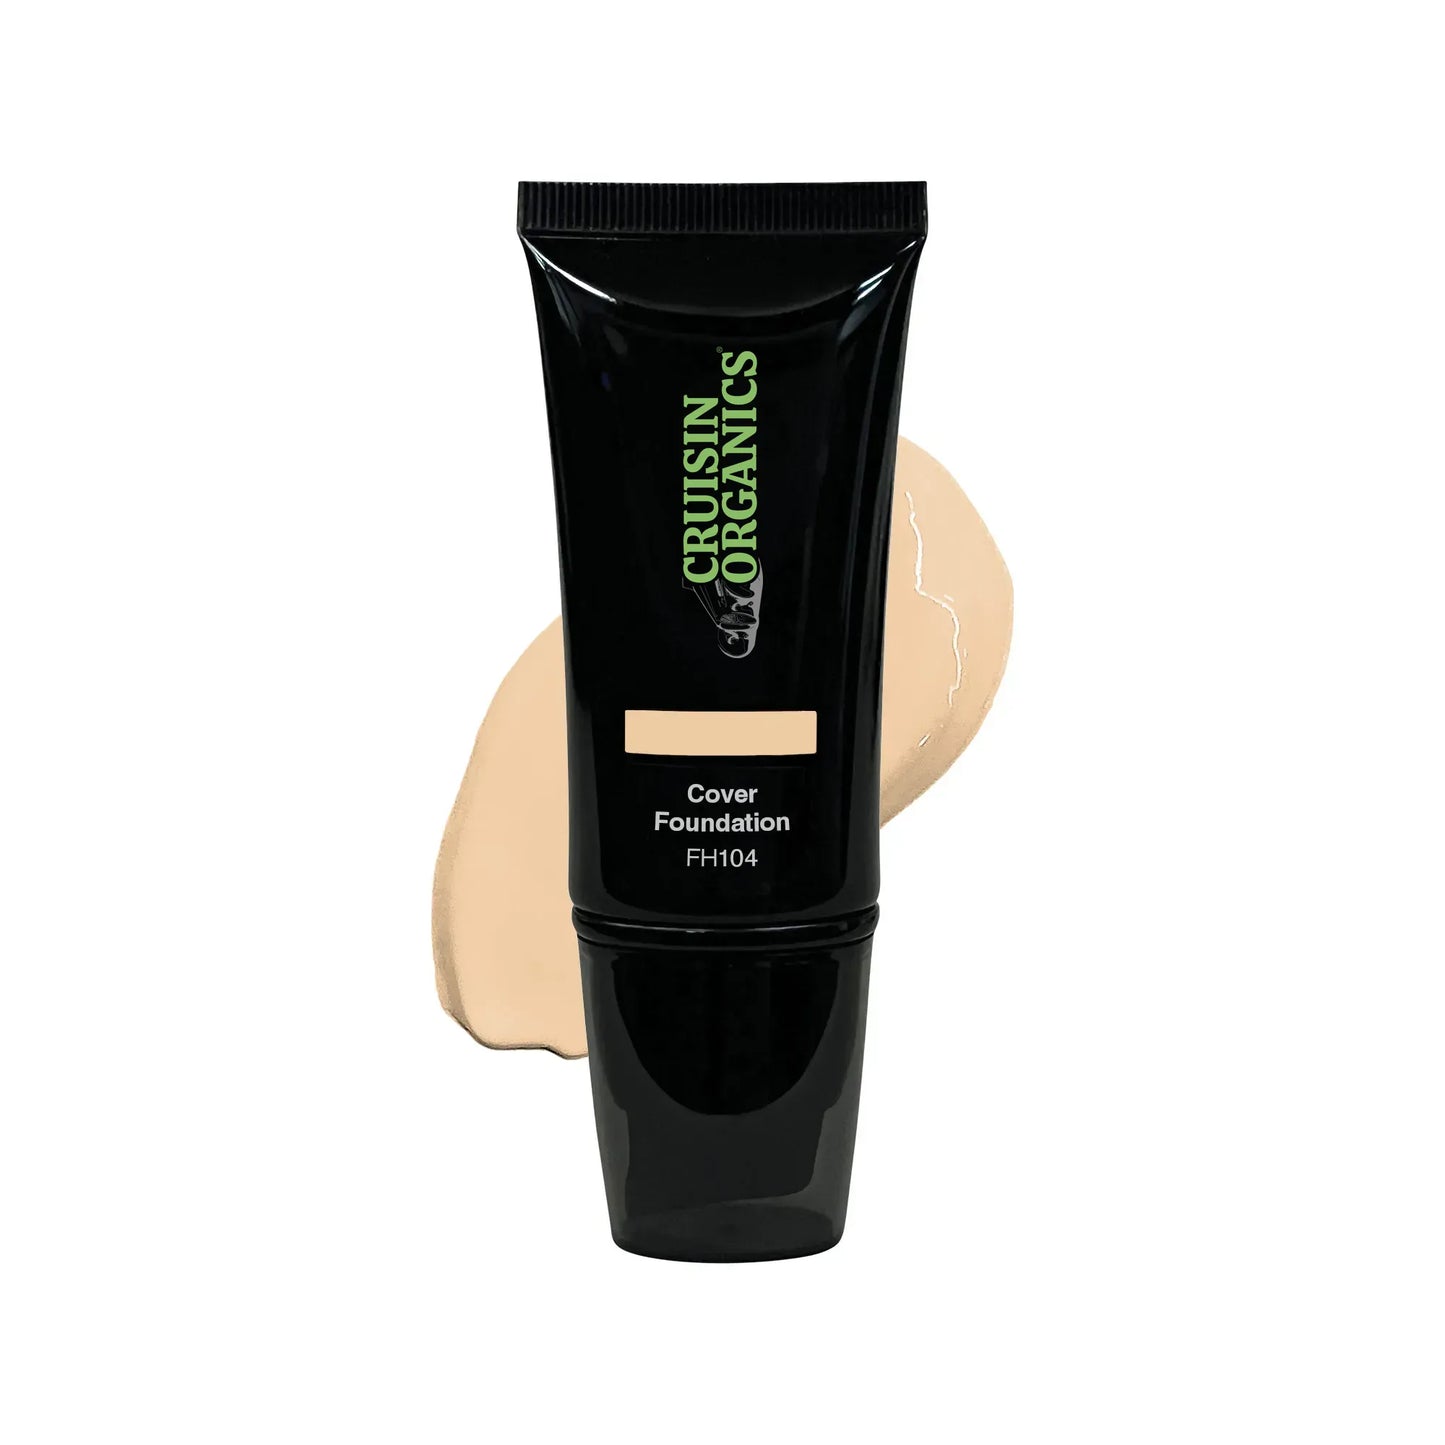 Praline Foundation by Cruisin Organics. Because of greater stimulation, pigment-producing cells multiply and dark spots don't go away when the inflammation does. Choose Cruisin Organics cosmetics to get better, cutting edge makeup for sluggish issues. A groundbreaking remedy for people with skin discolorations.